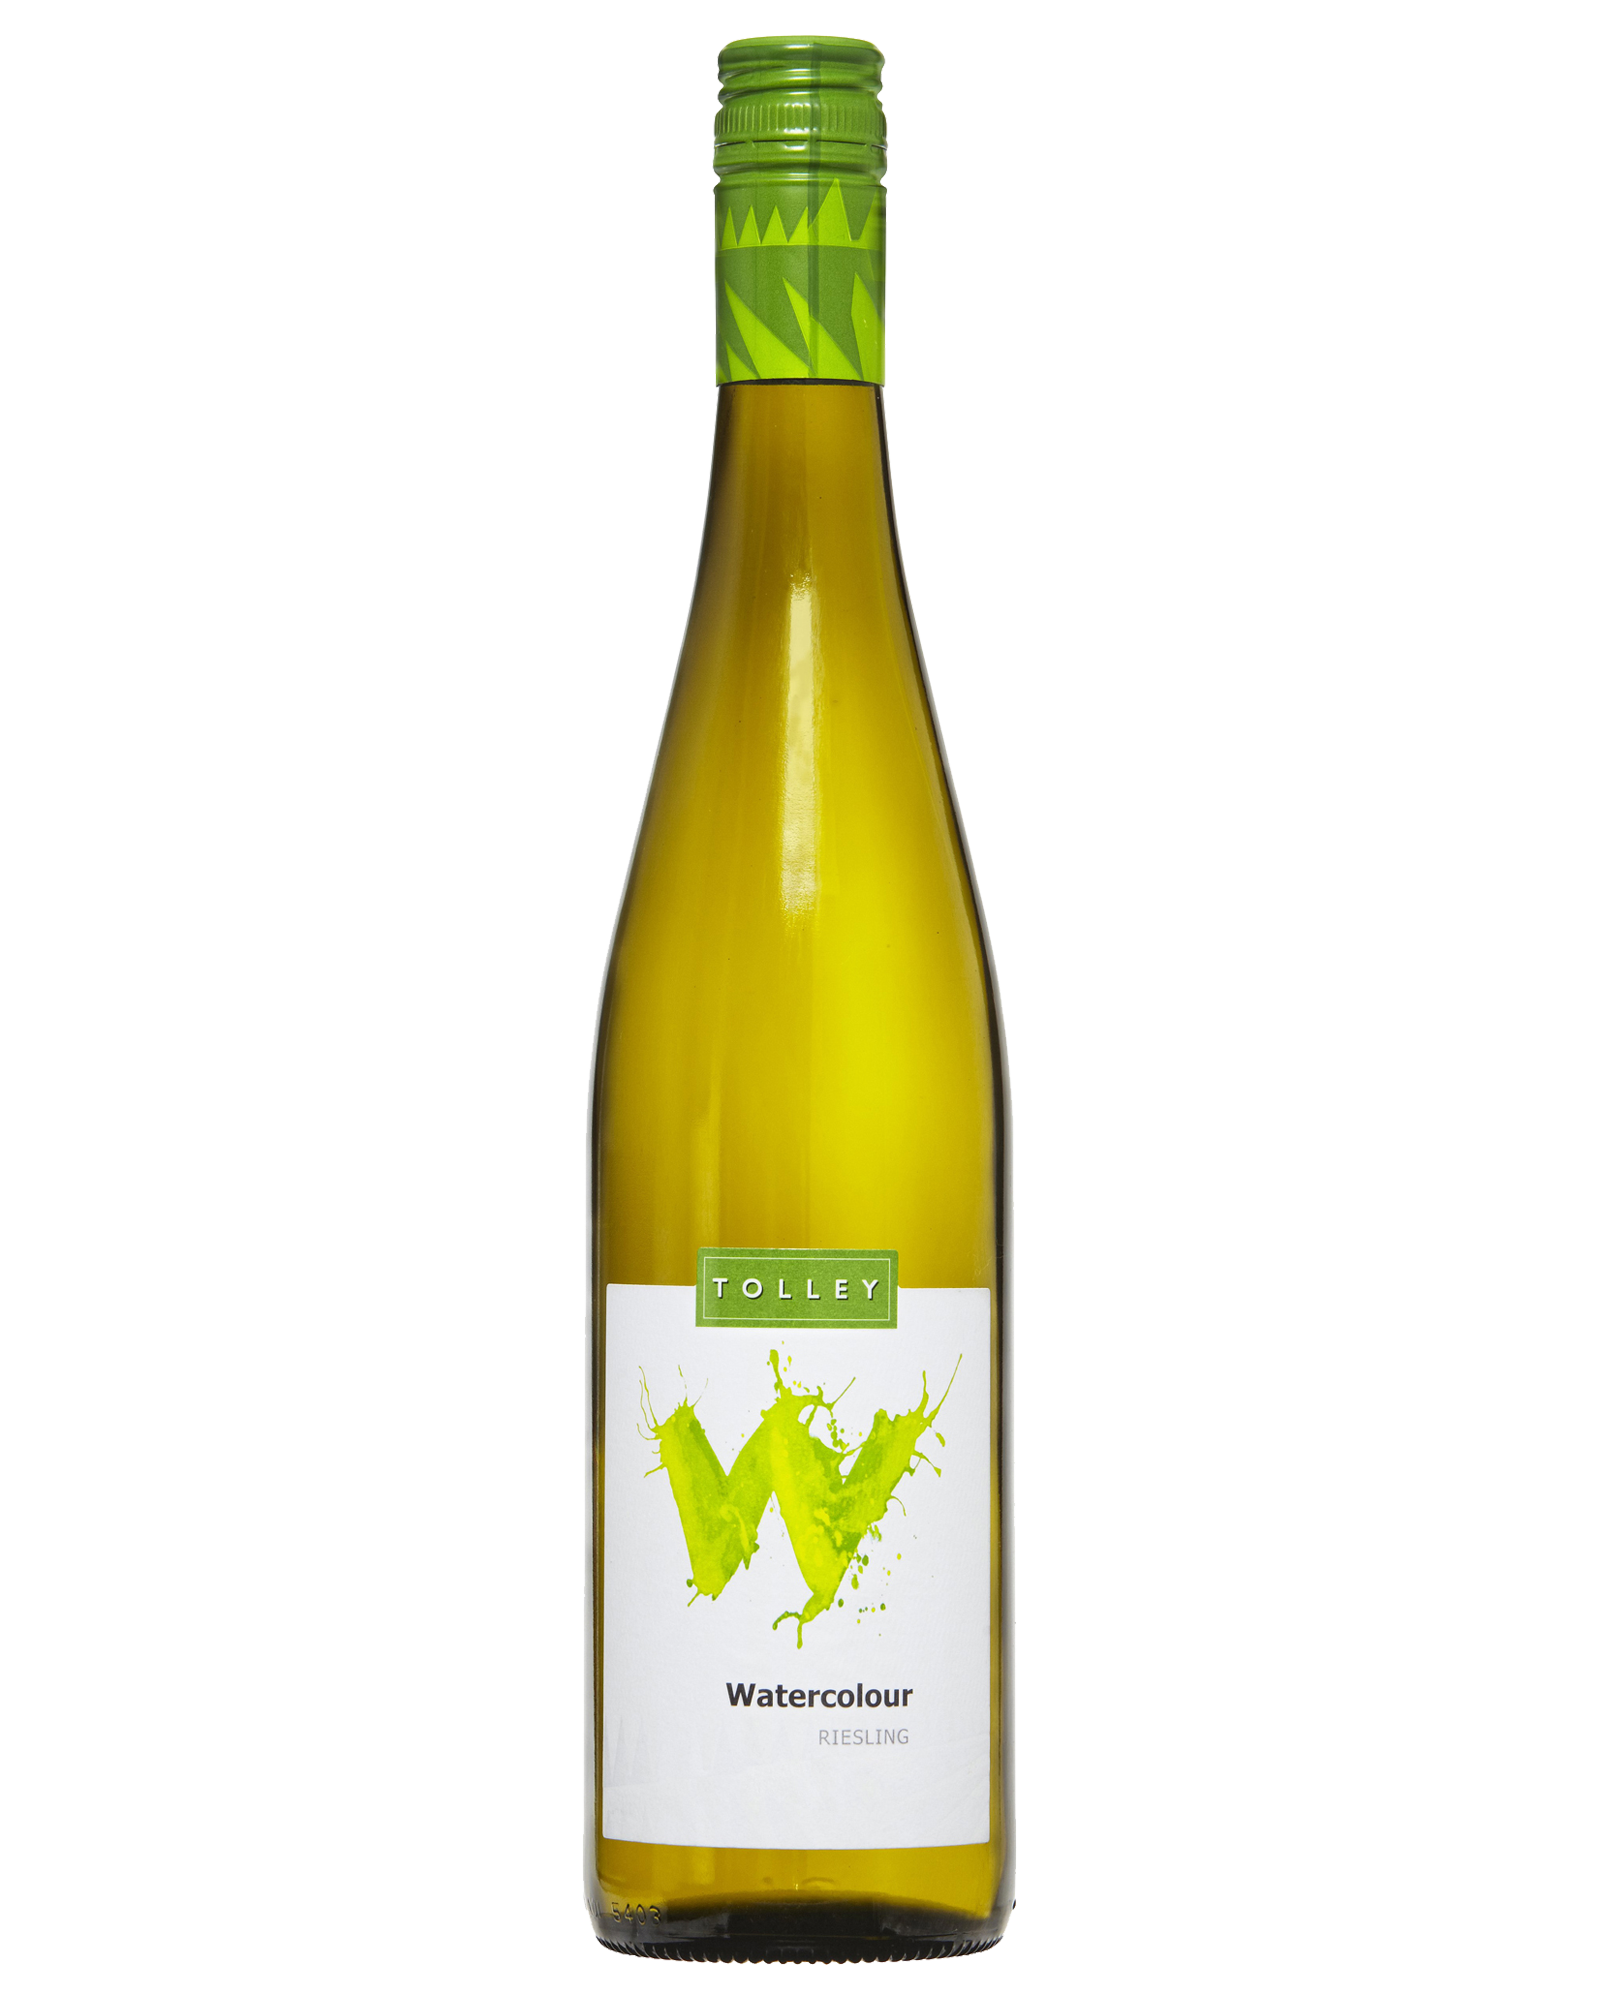 Tolley Watercolour Riesling